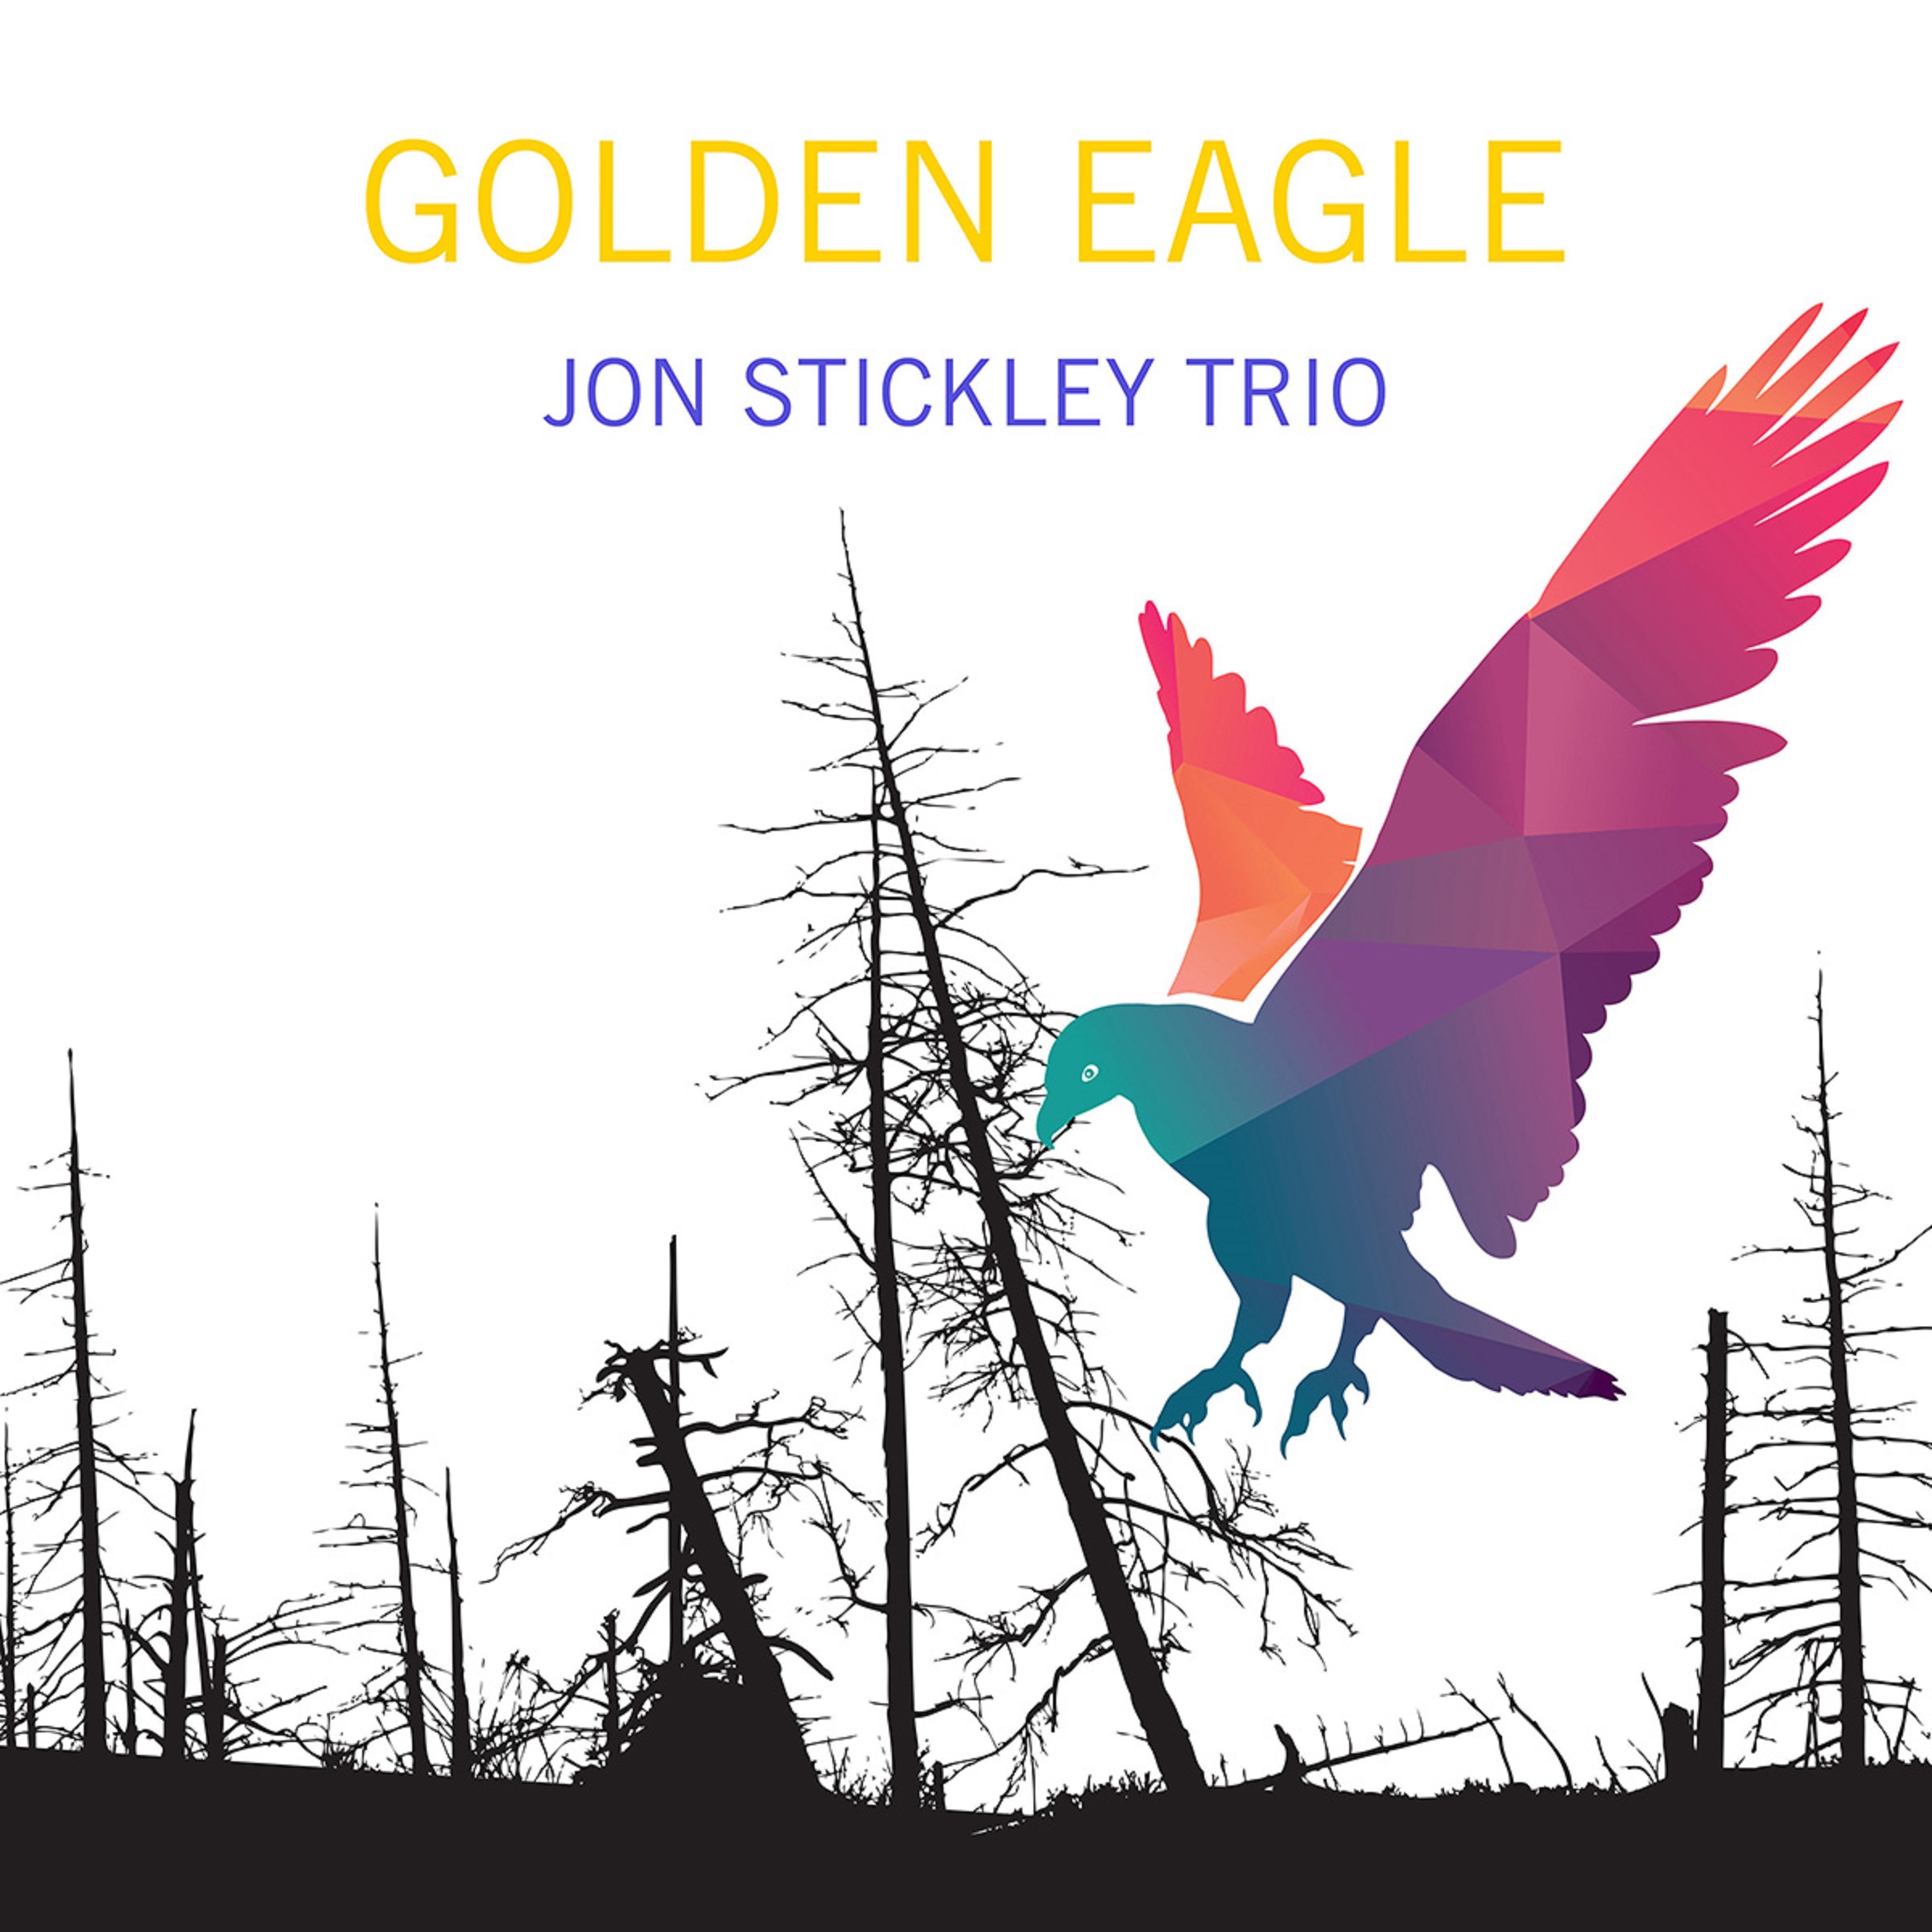 Jon Stickley Trio captures the thrill of the hunt with “Golden Eagle”